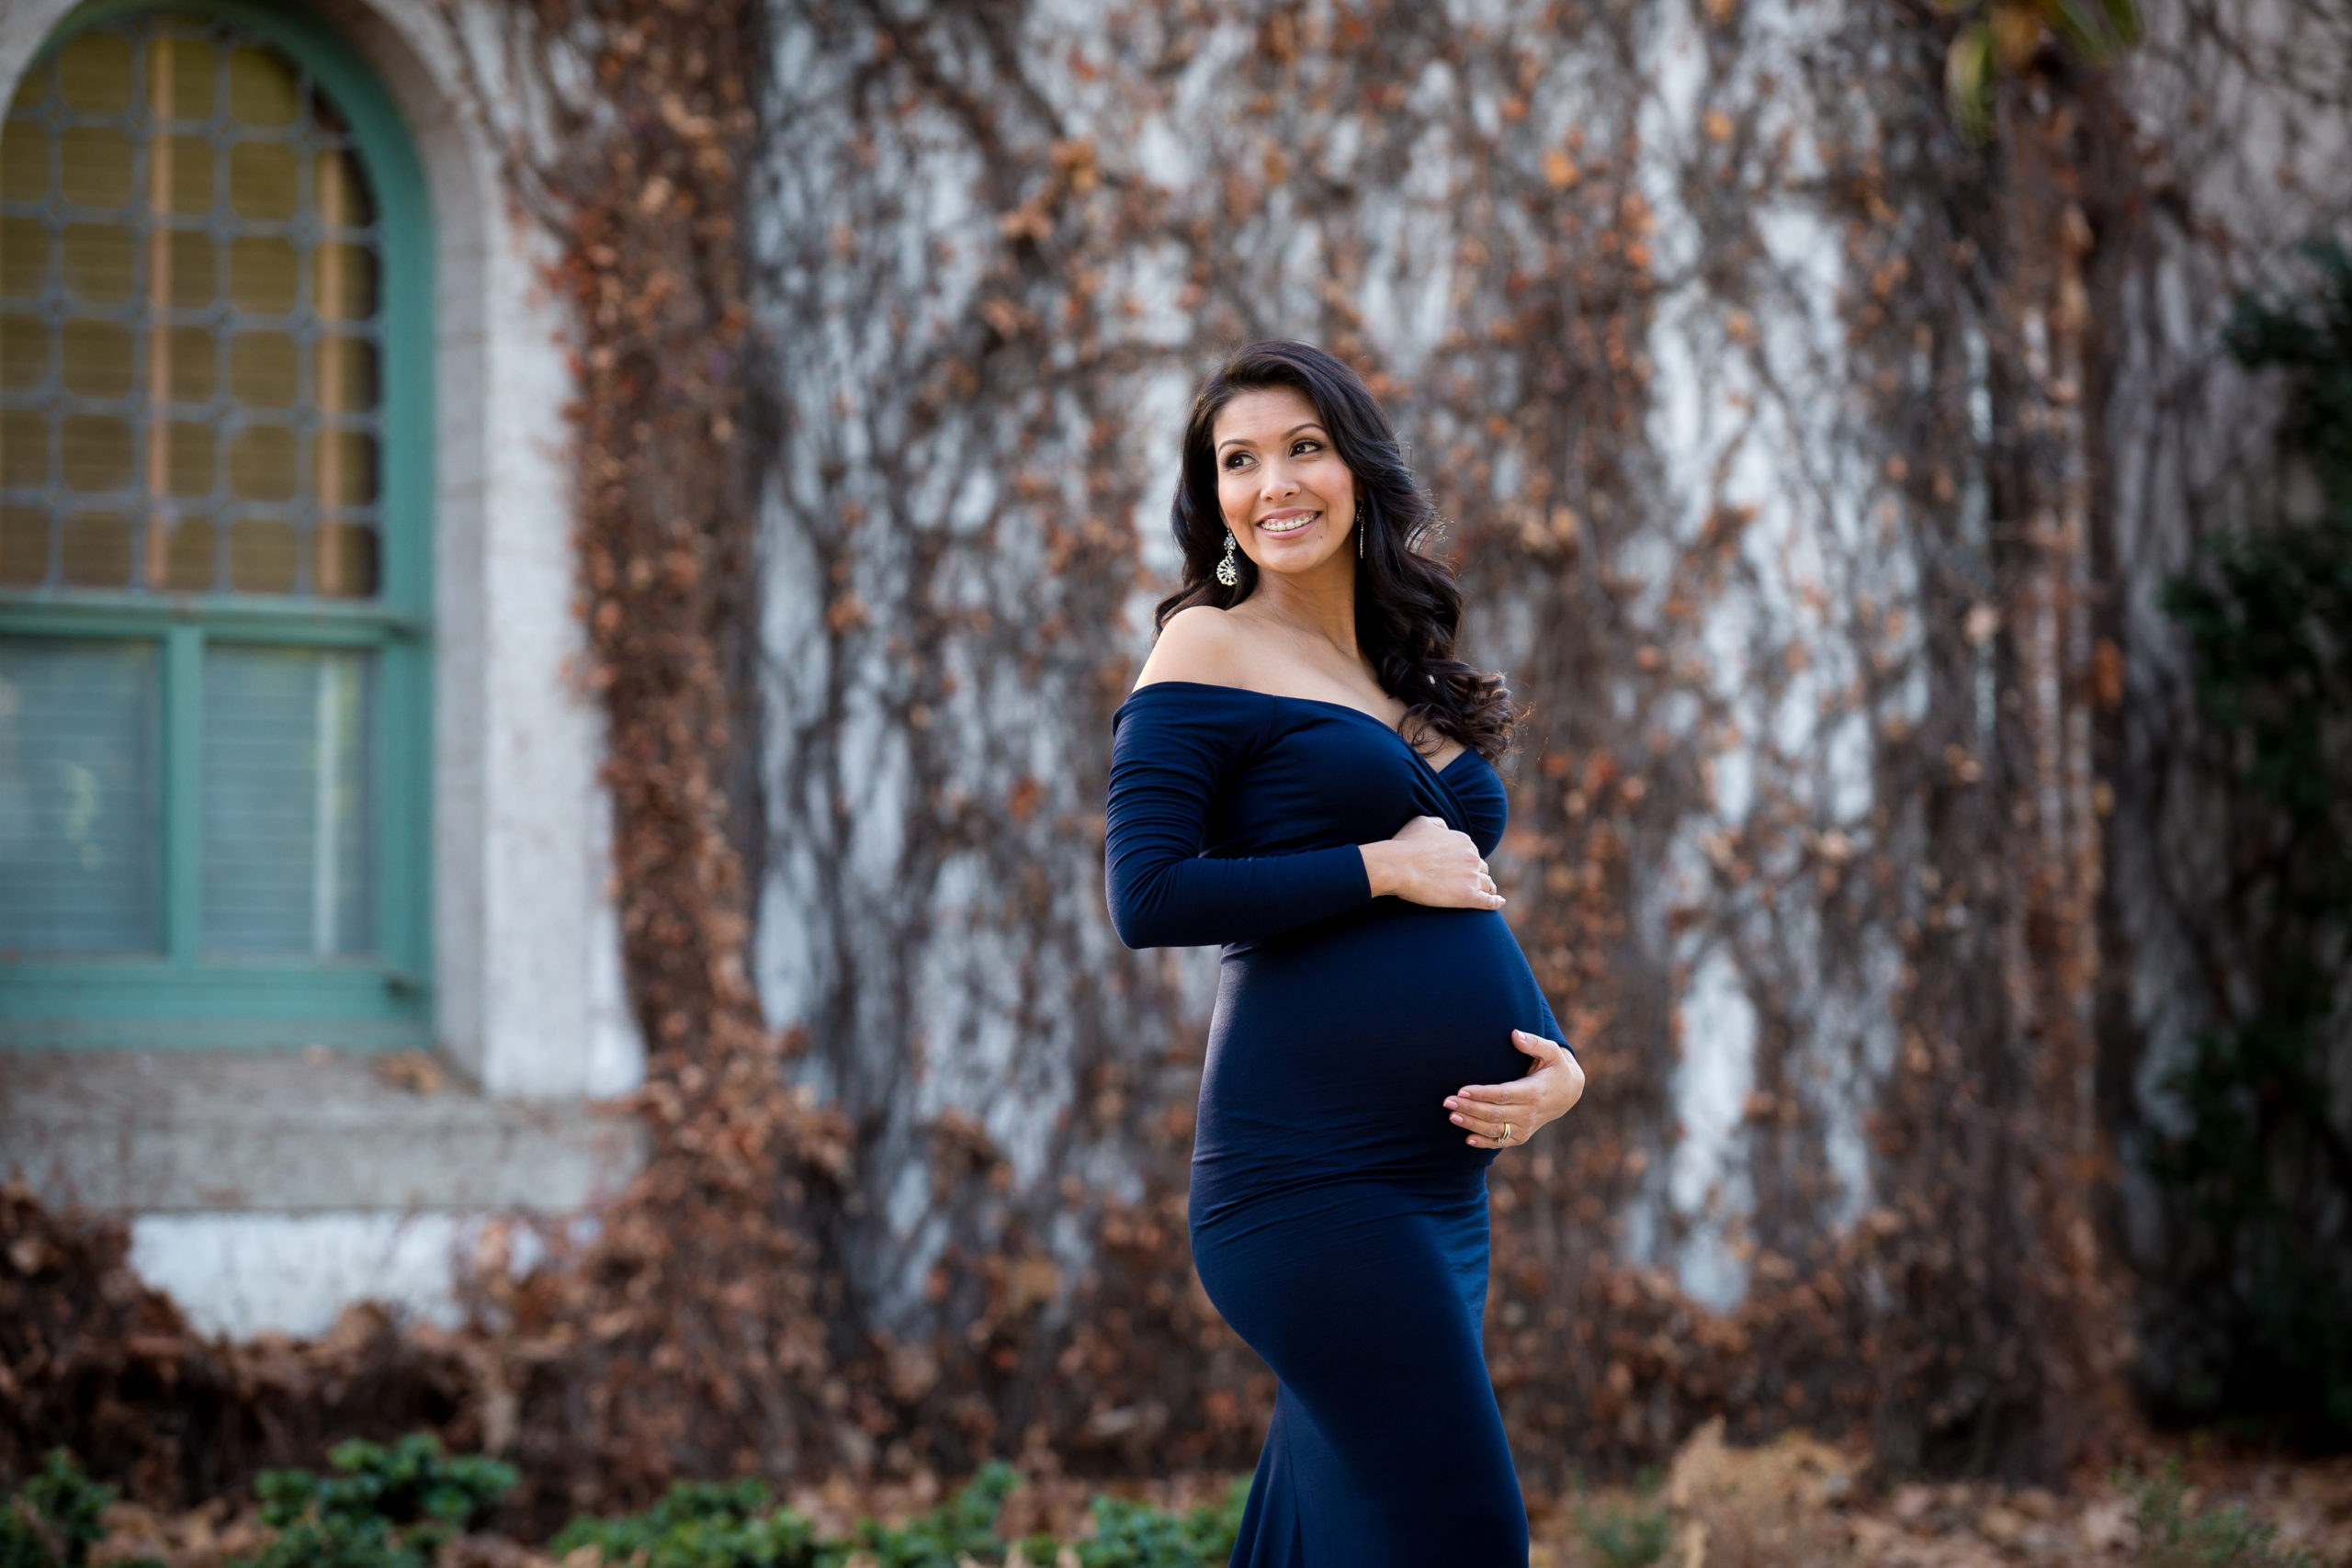 Maternity and family photographer based in Columbia, mo